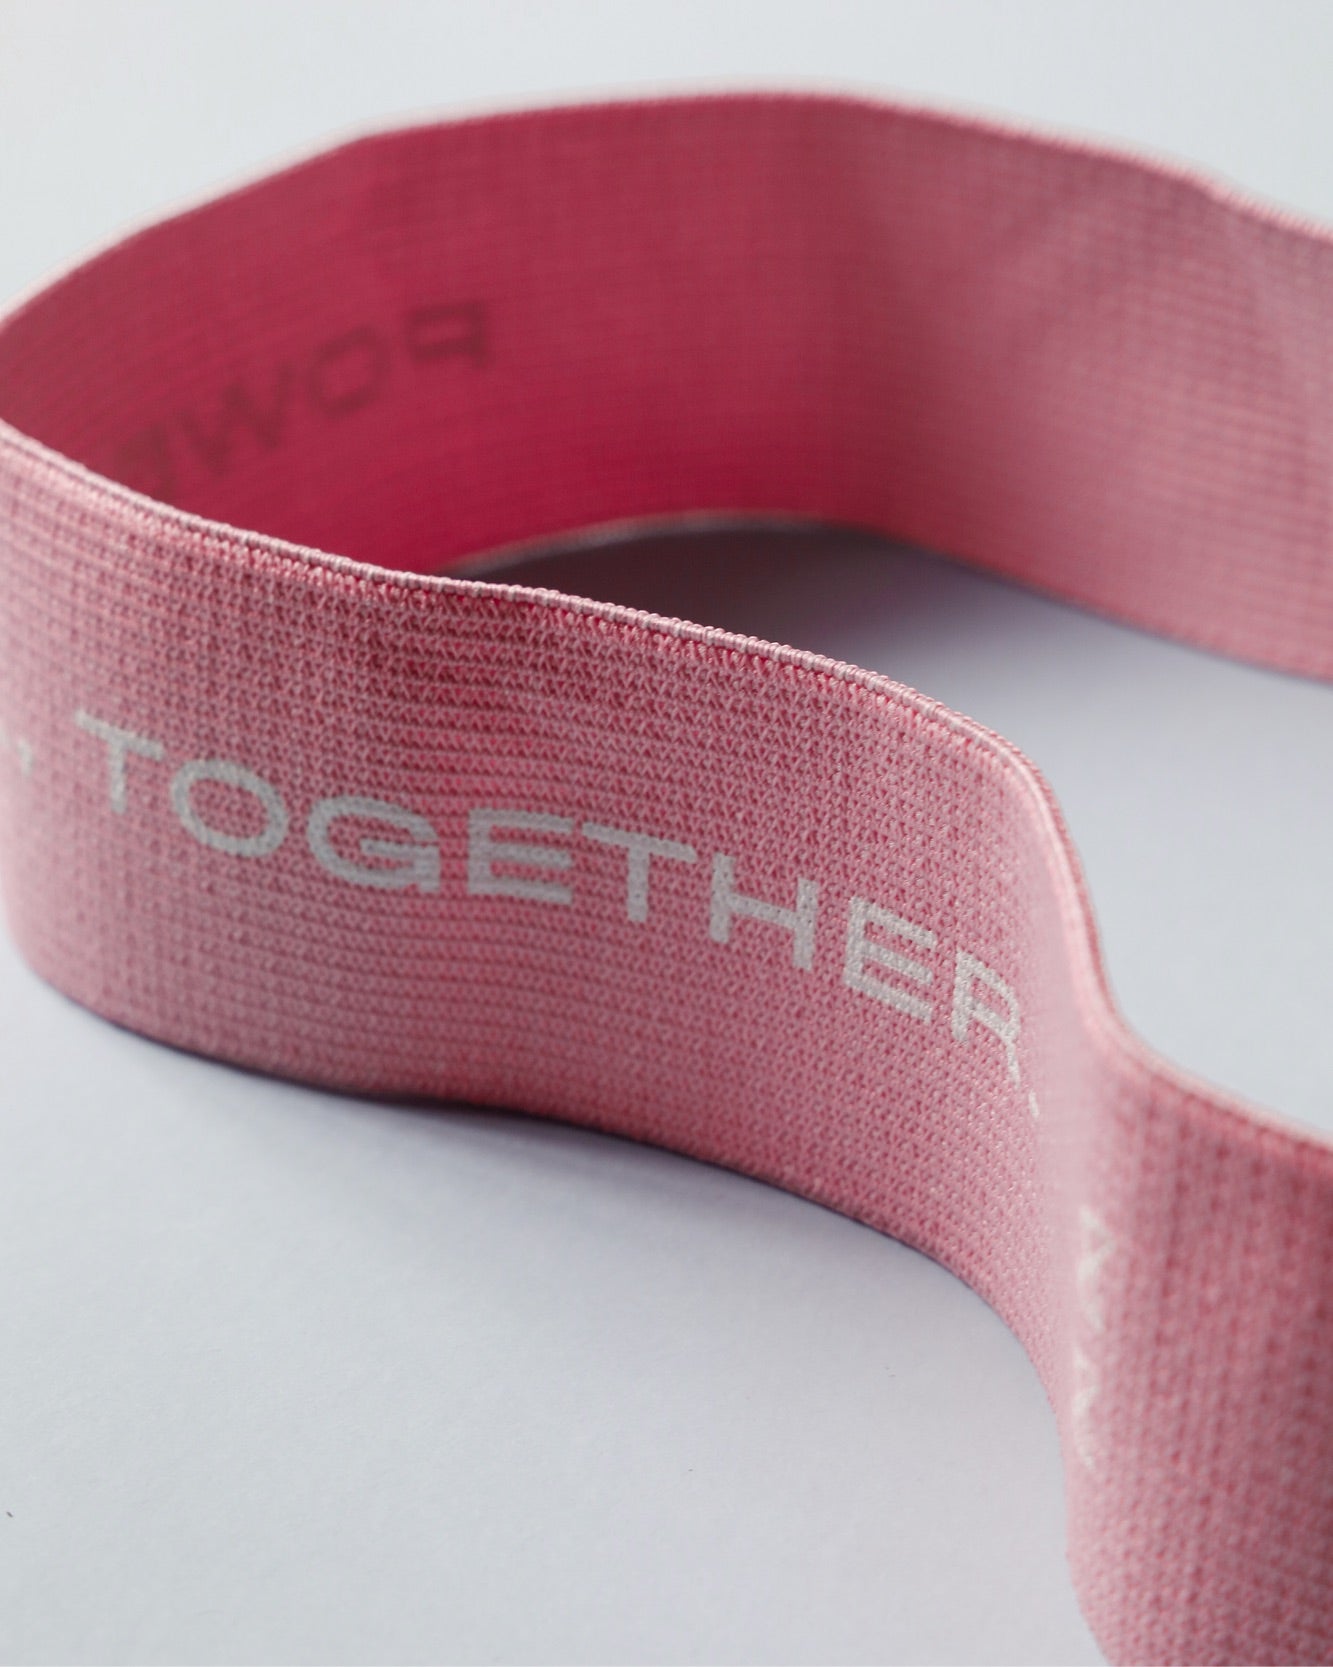 Fabric Resistance Band